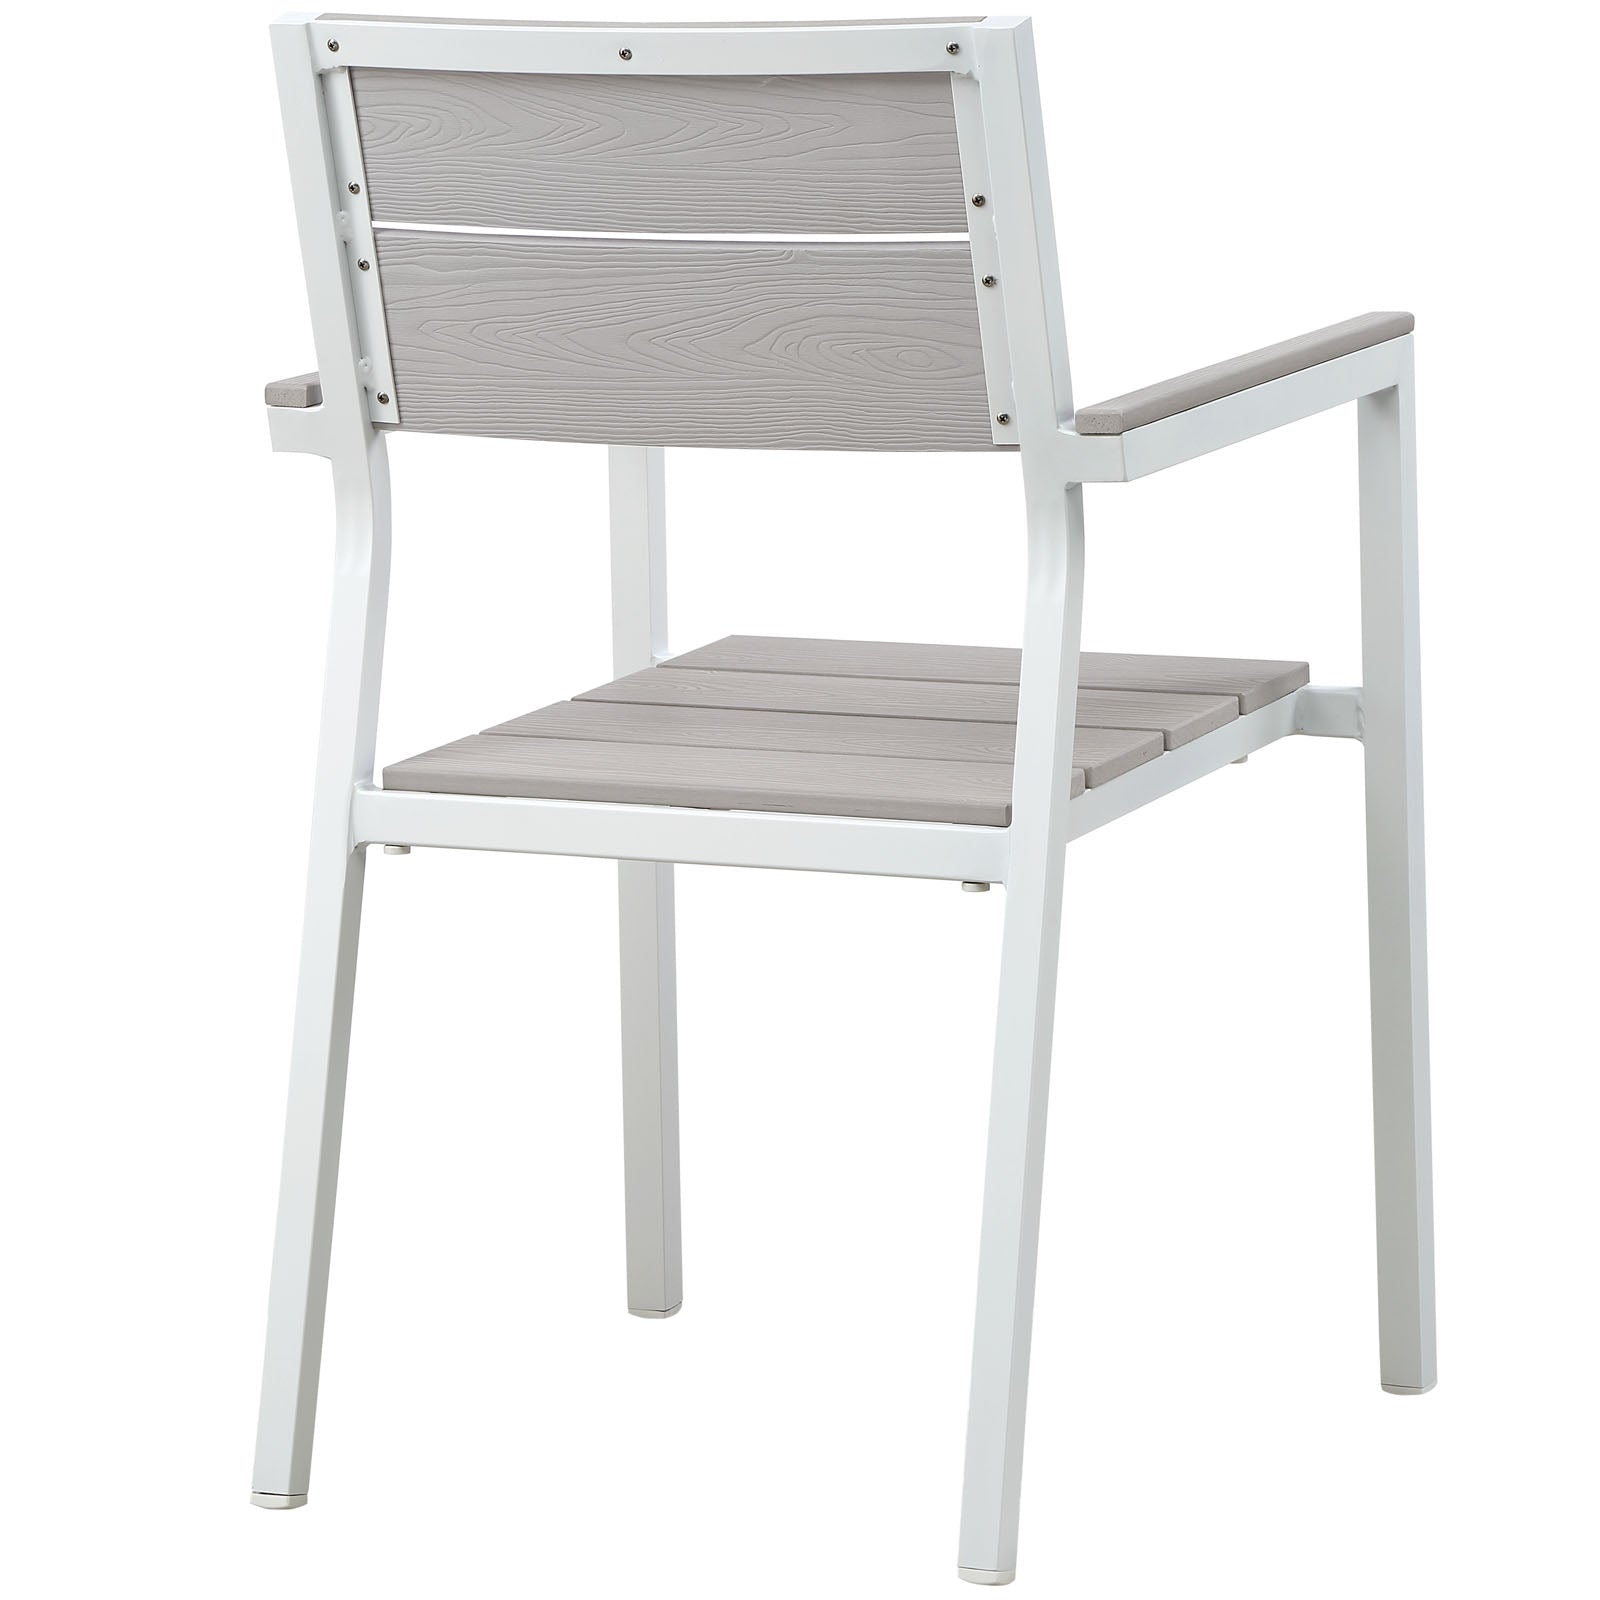 Modway Outdoor Dining Sets - Maine 3 Piece Outdoor Patio Dining Set White & Light Gray